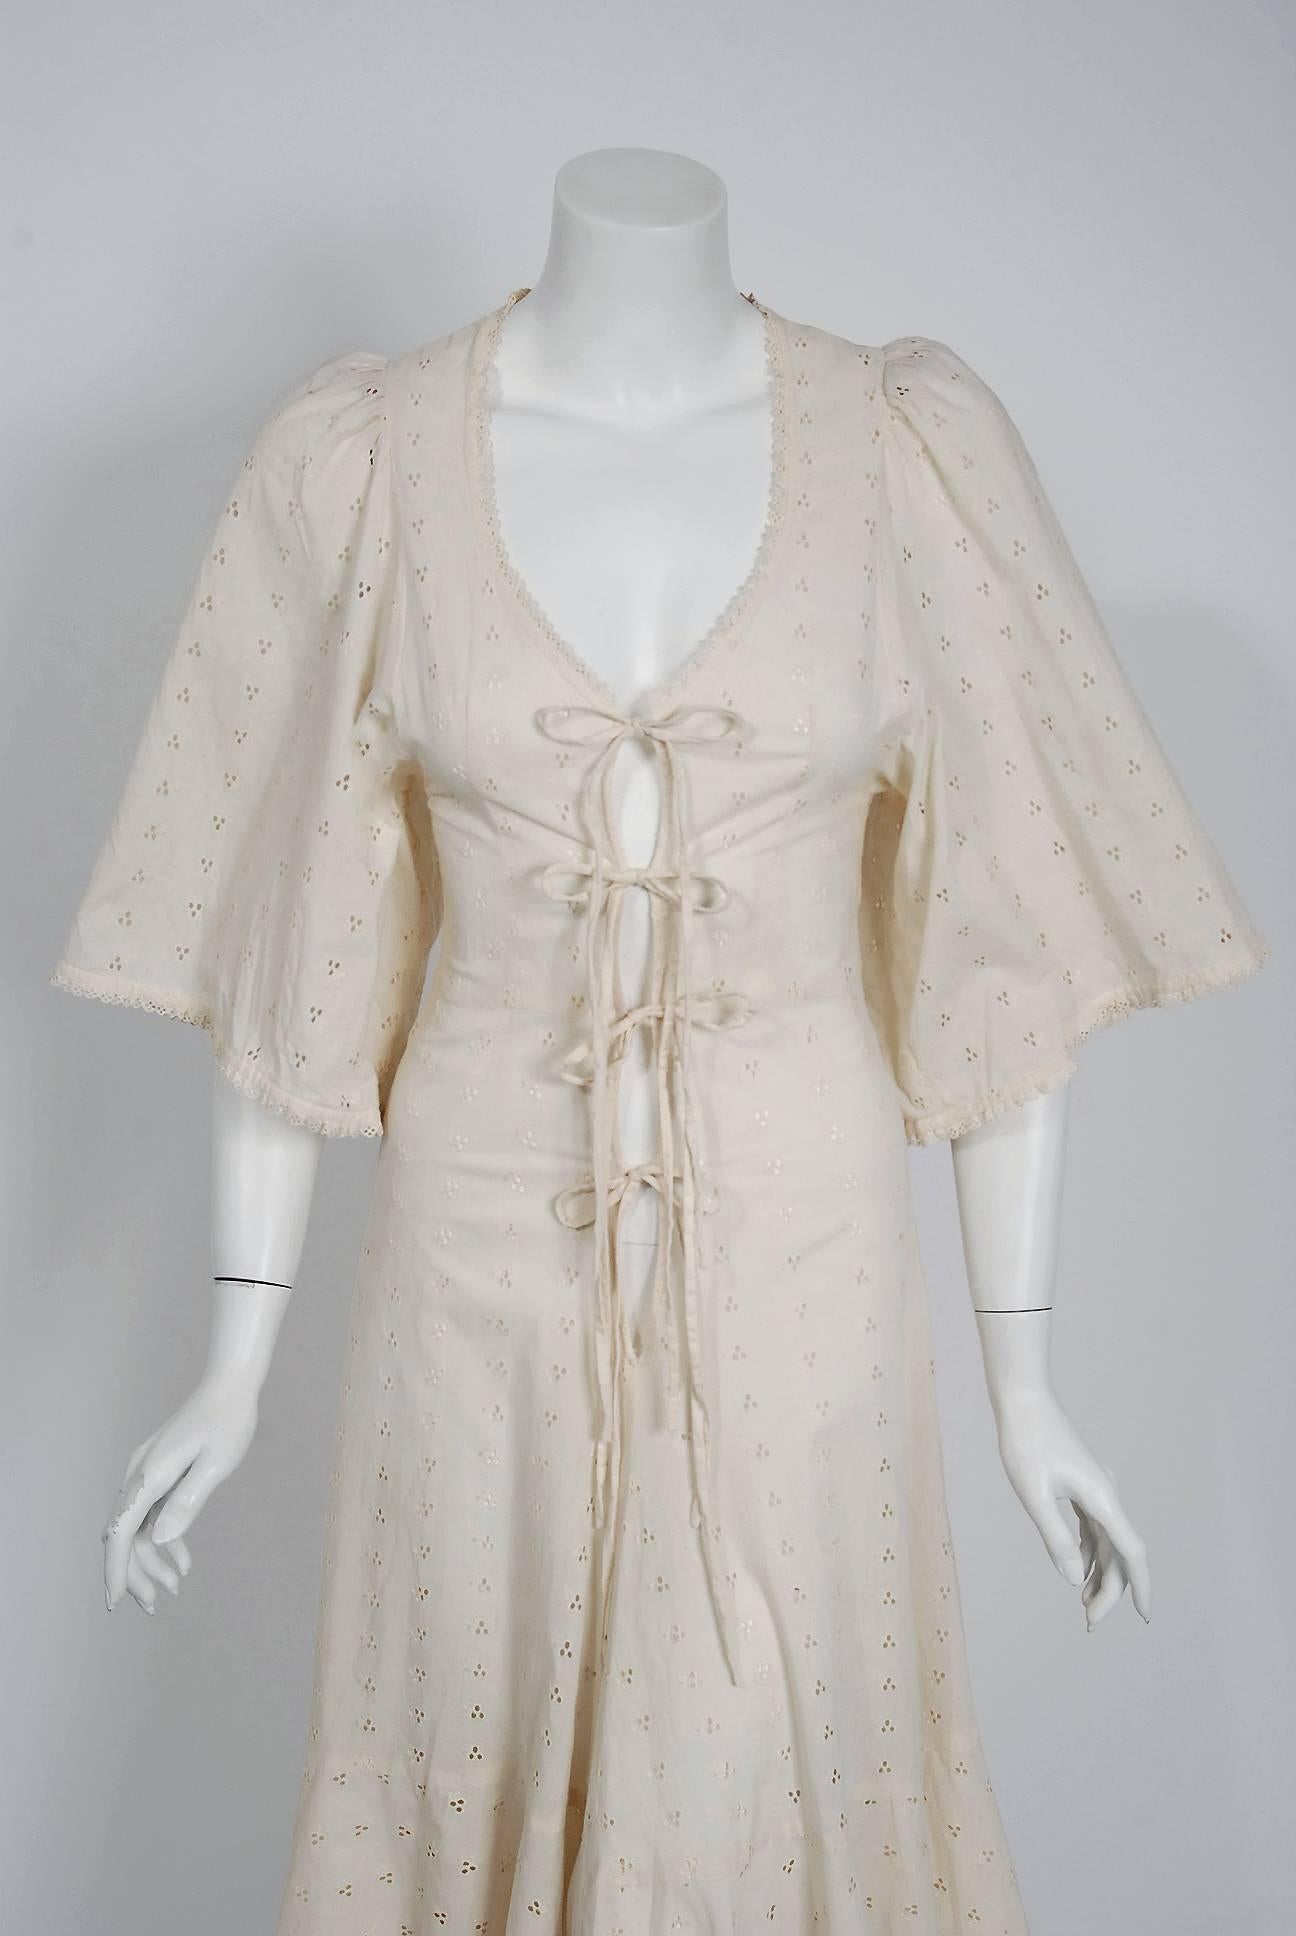 If you were an “It Girl” in London during the 1960's and 1970's, Biba is where you would have shopped. This sensational creme sheer-semi eyelet sundress is a perfect example of the brand's genius. It is a soft cotton with all the classic hallmarks